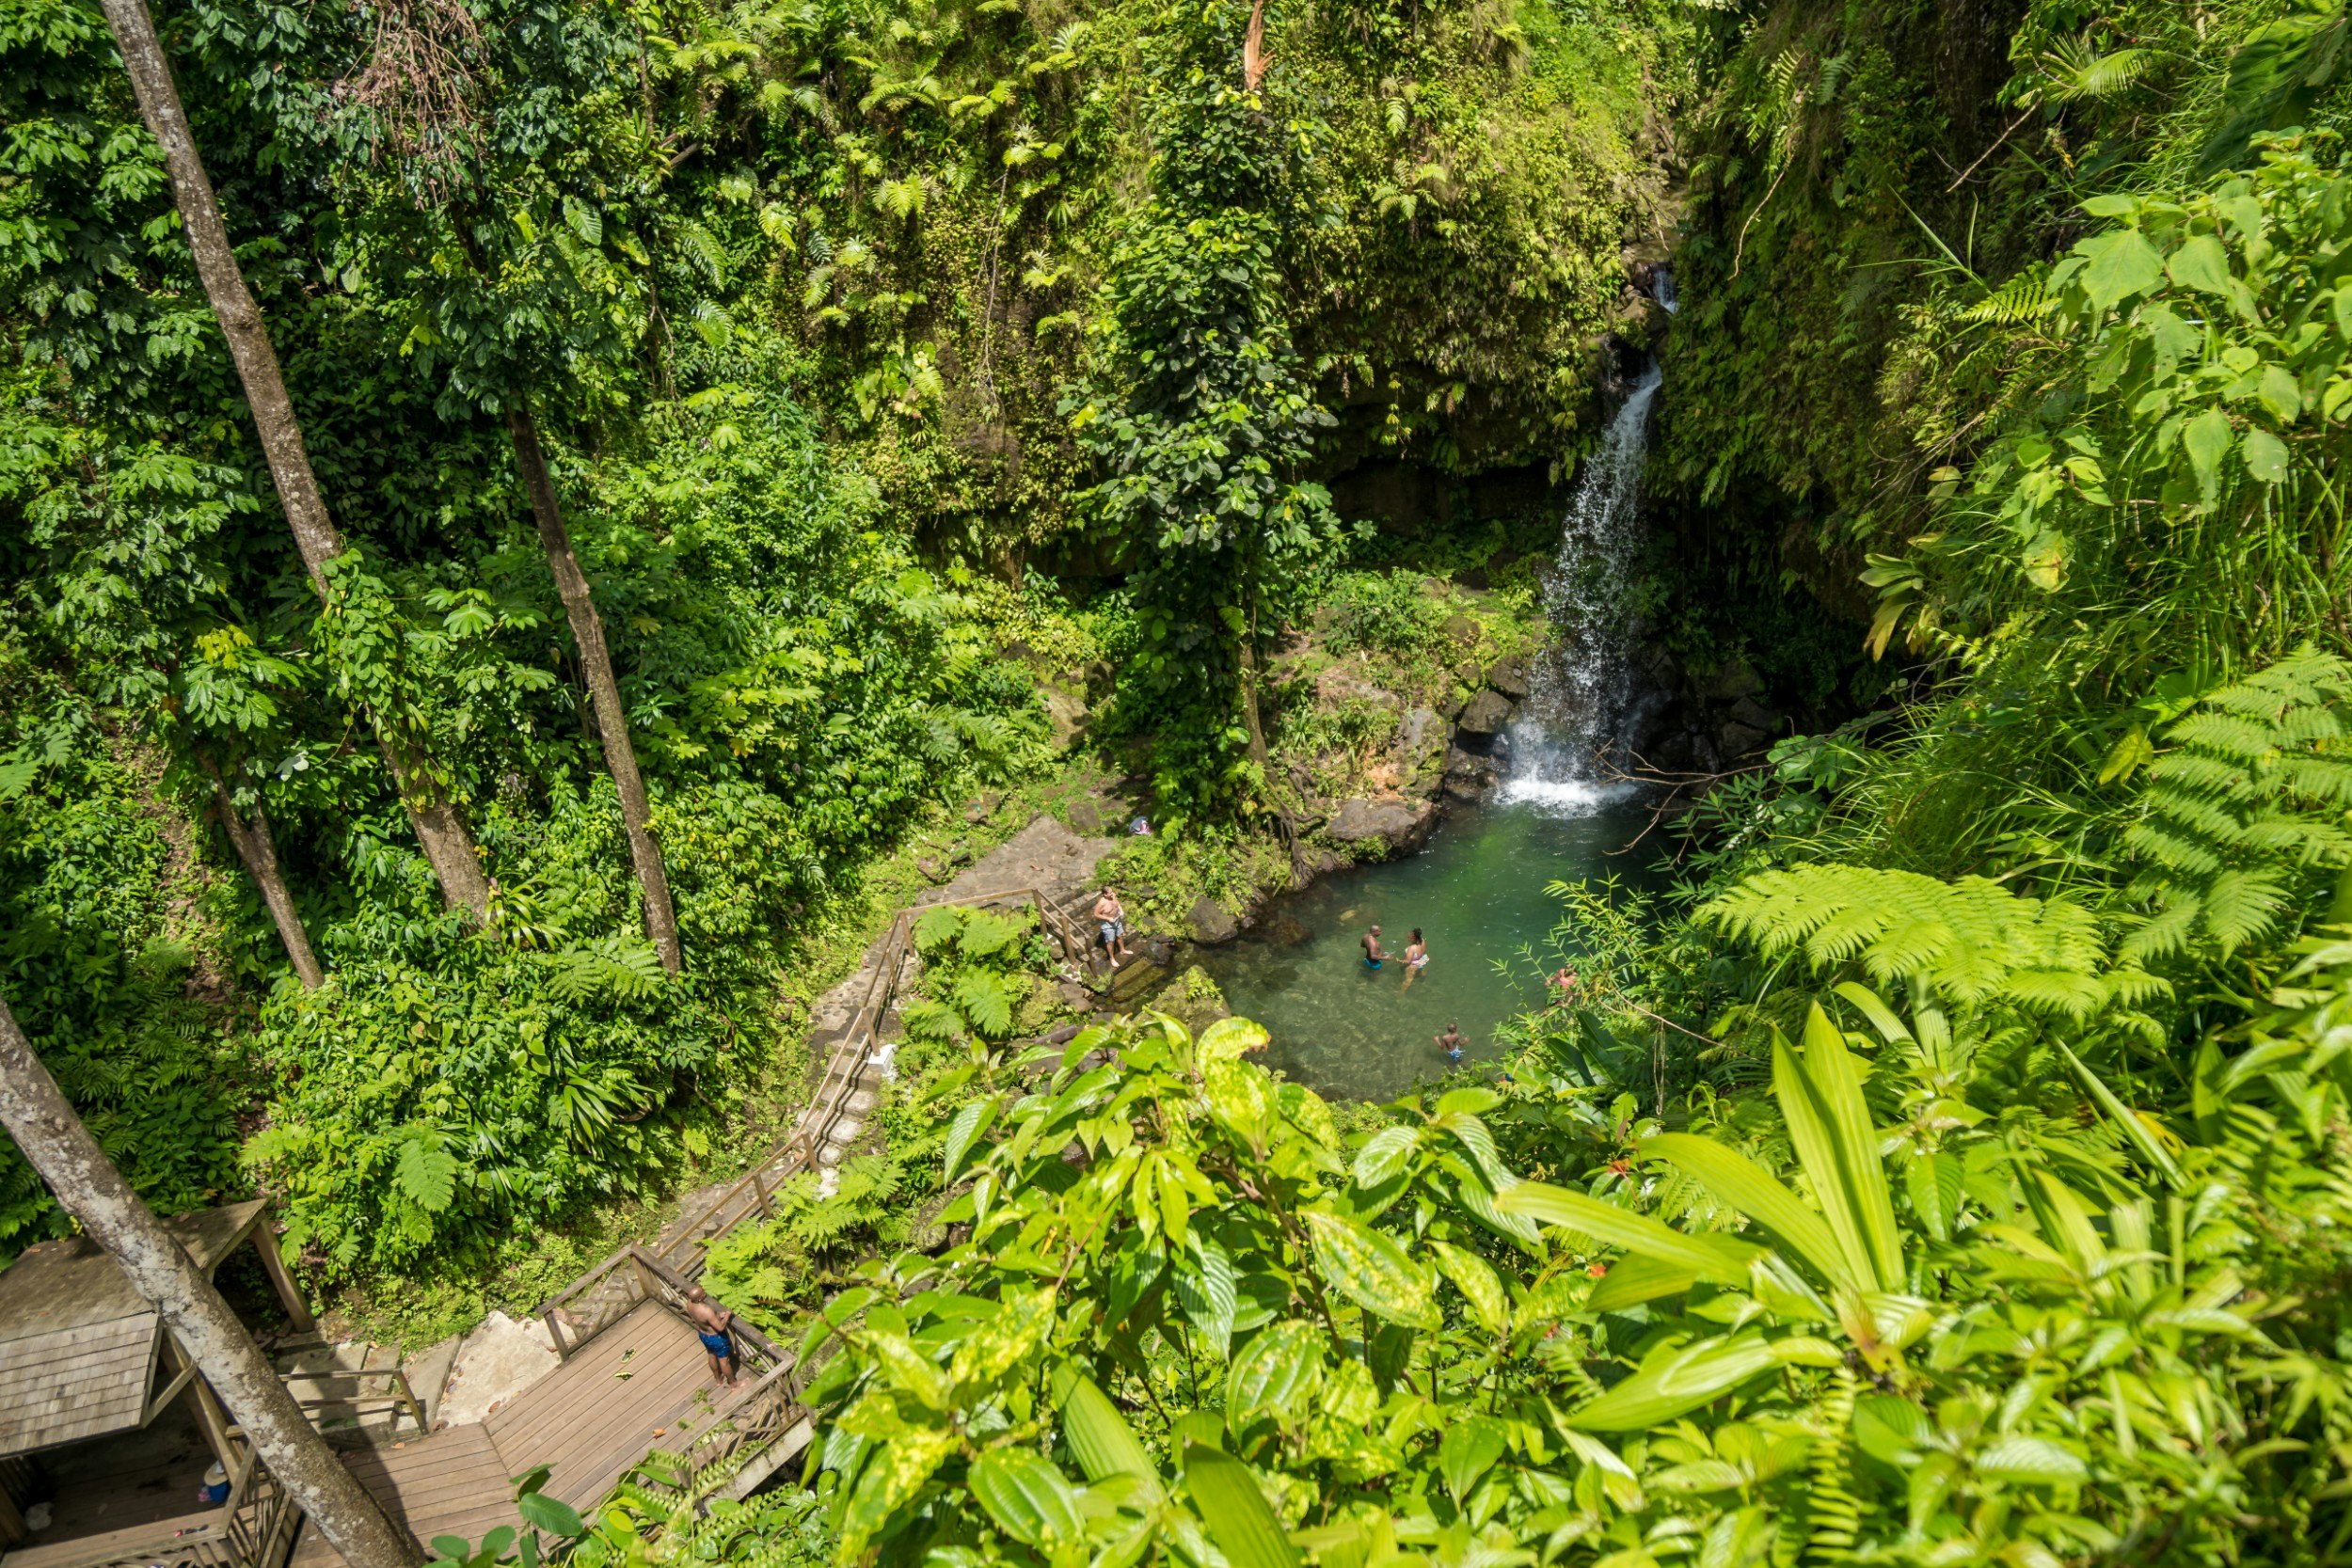 A view of a waterfall and forest in Dominica